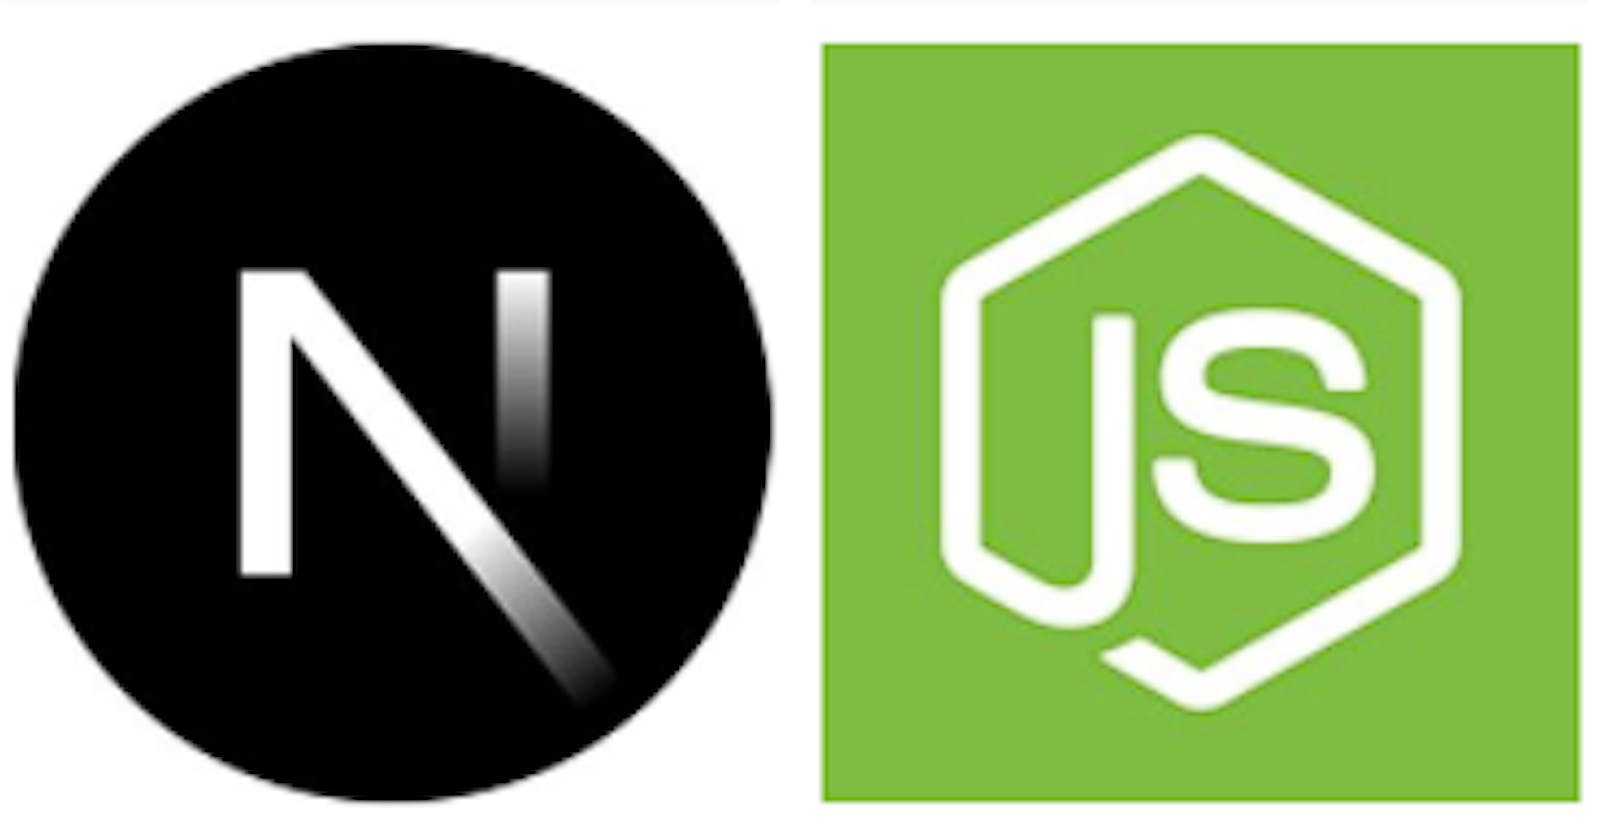 Can we make use of Next.js instead than Express.js